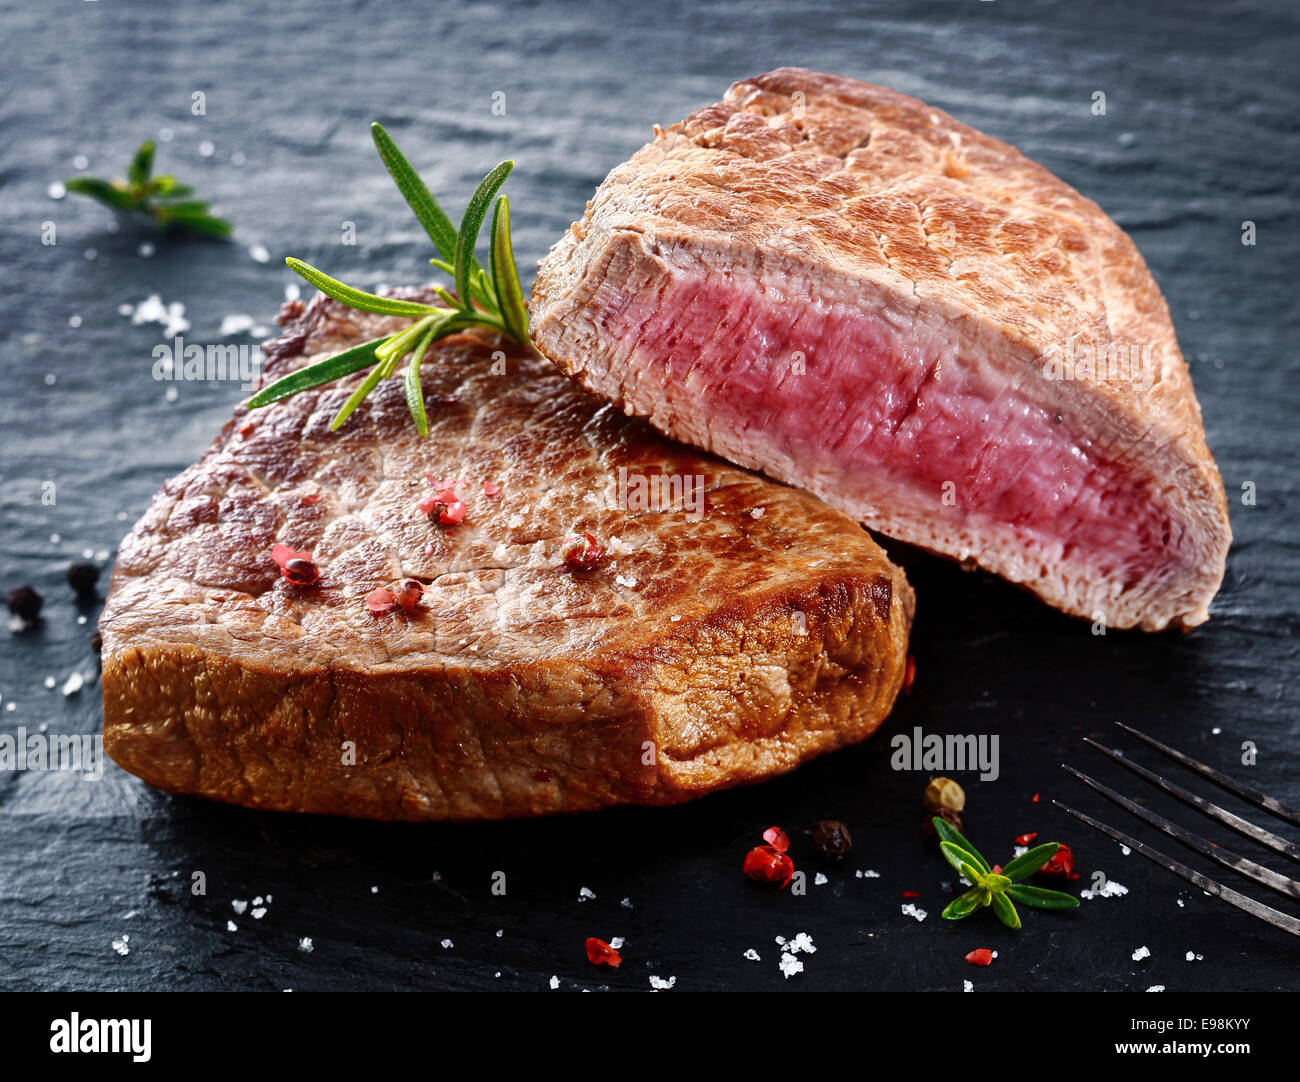 Two portions of lean trimmed grilled beef steak cut through to show the succulent tender red meat and seasoned with rosemary, salt and pepper in a steakhouse or restaurant Stock Photo